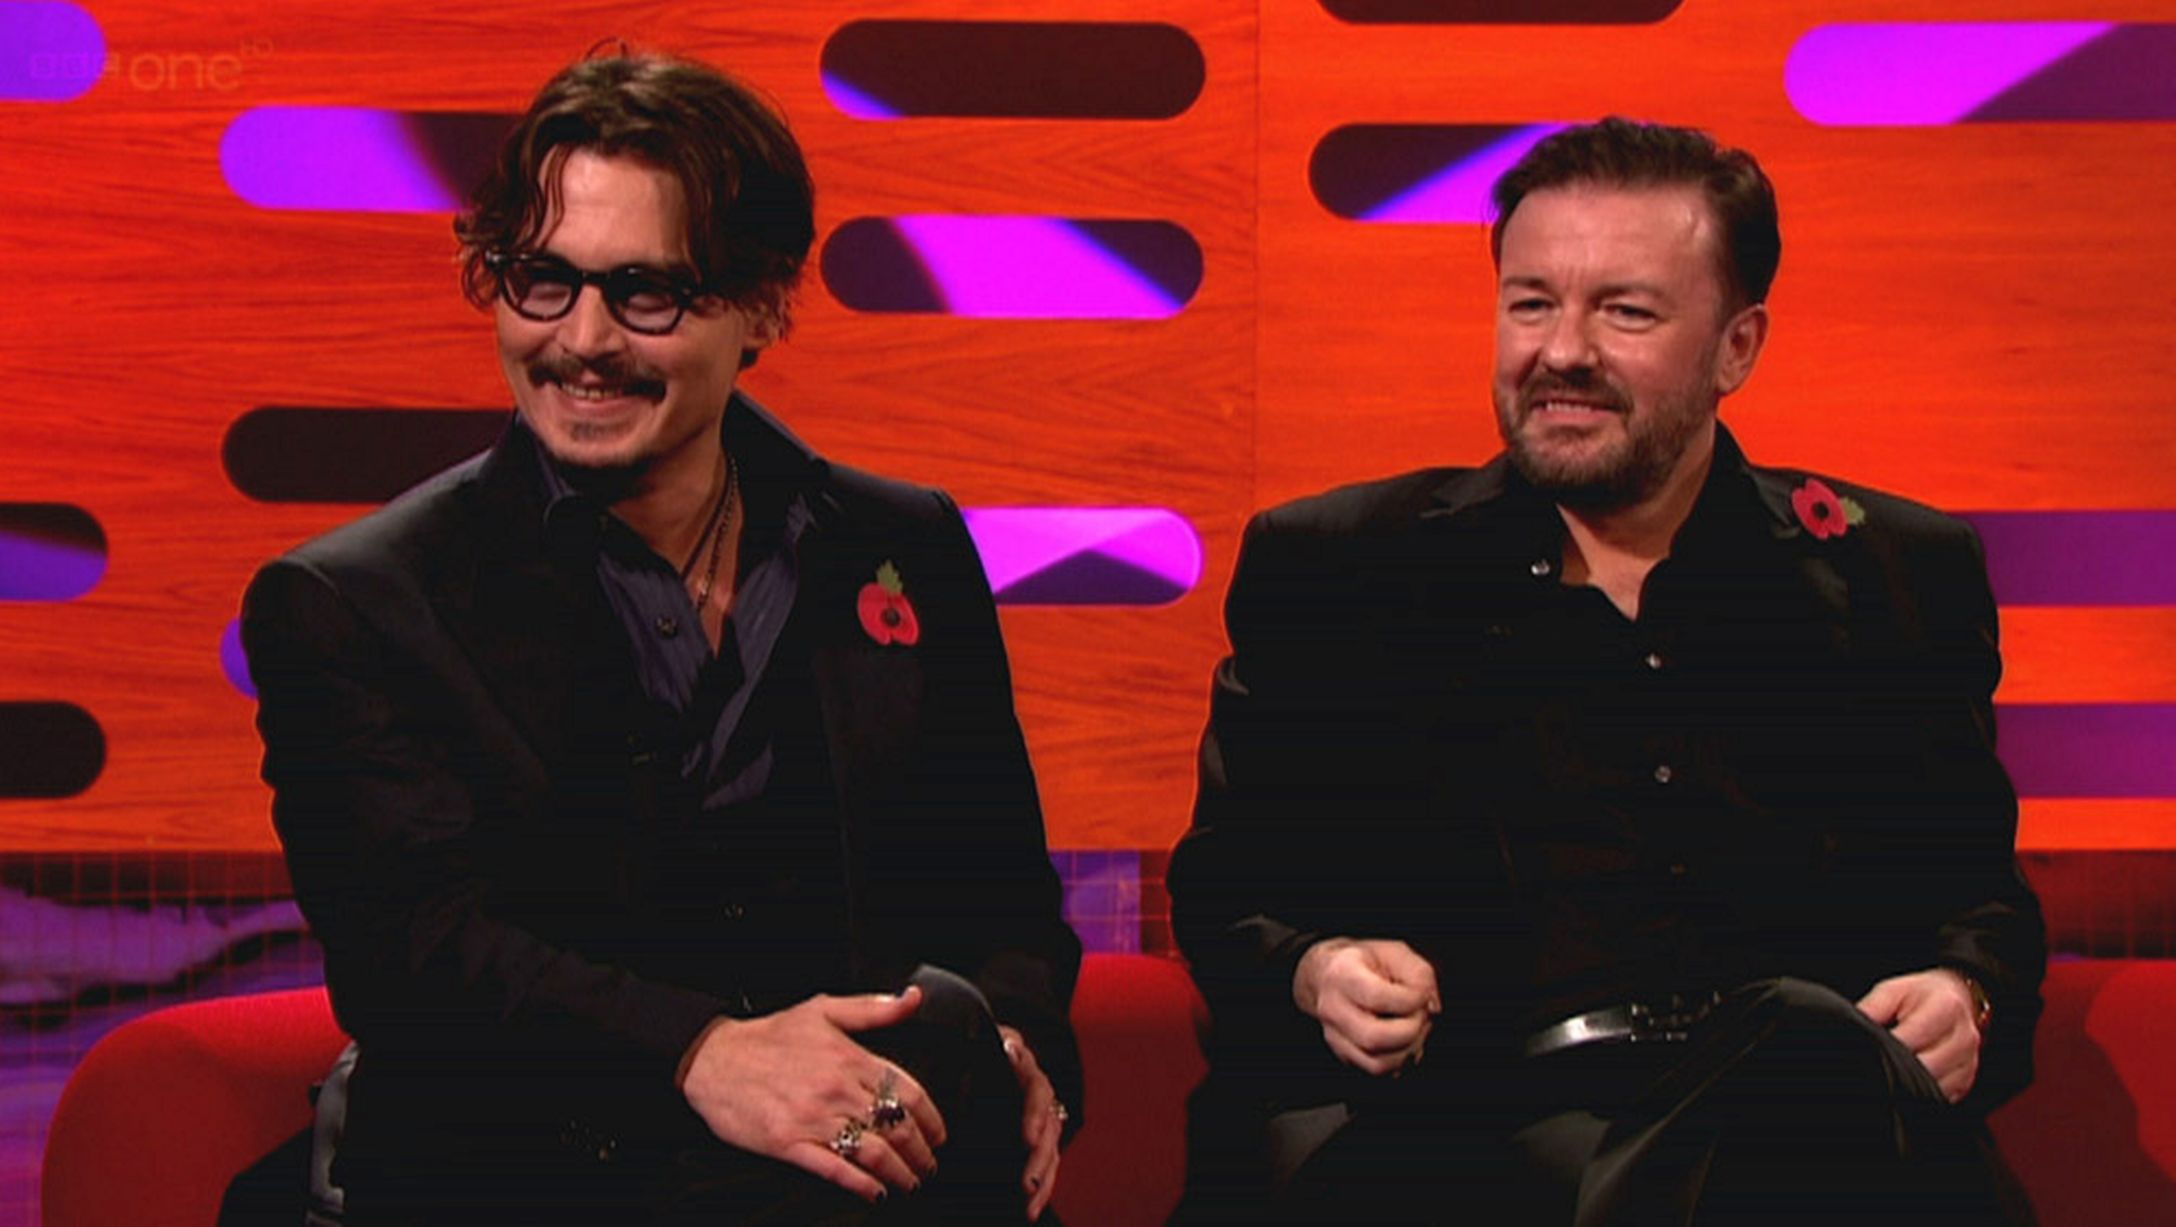 Johnny-Depp-and-Ricky-Gervais-2011